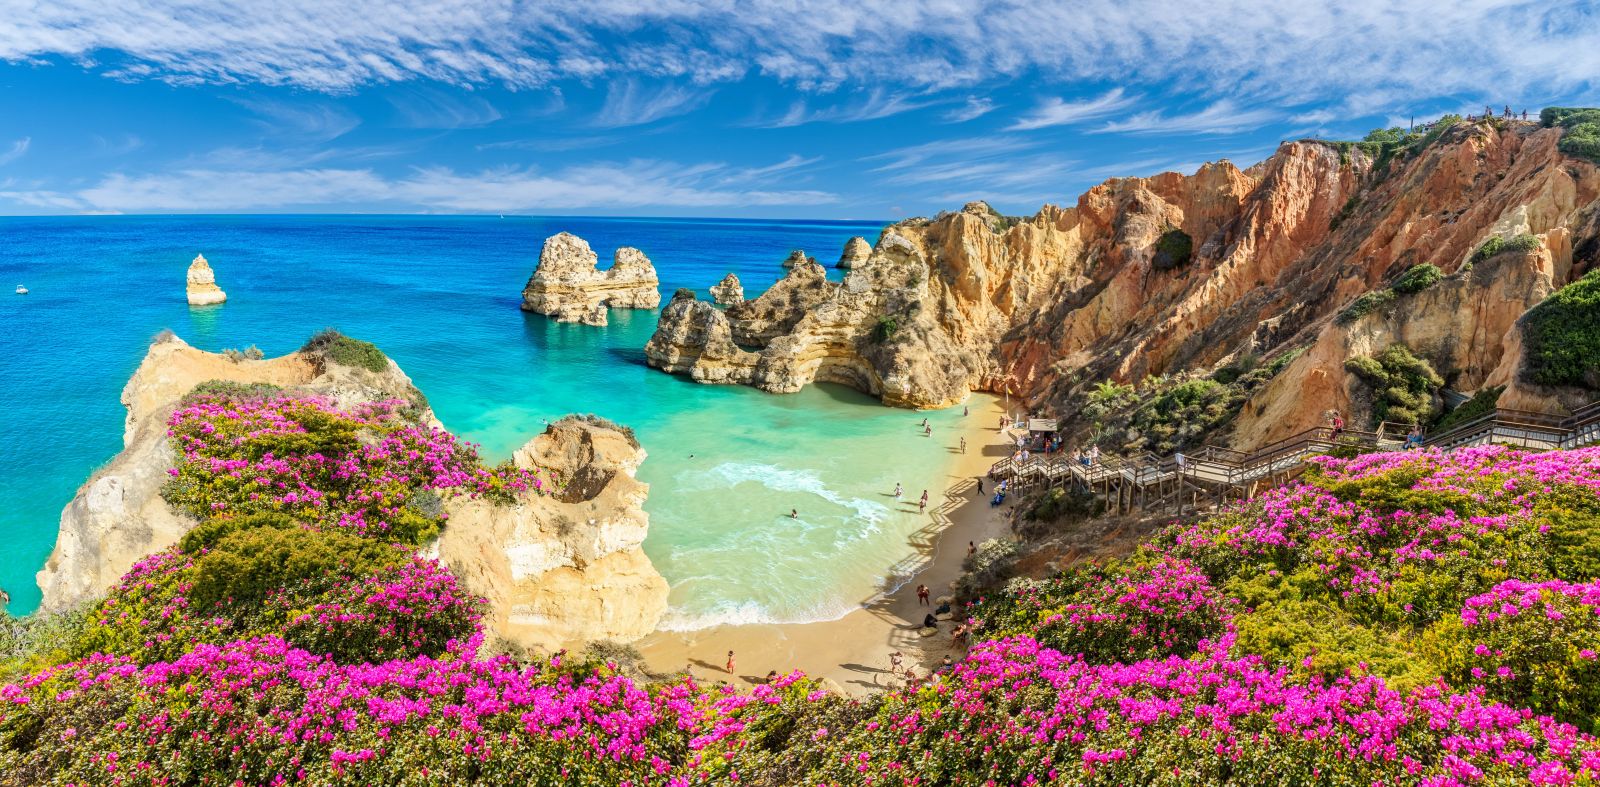 Praia do Camilo is one of the best beaches in the Algarve.